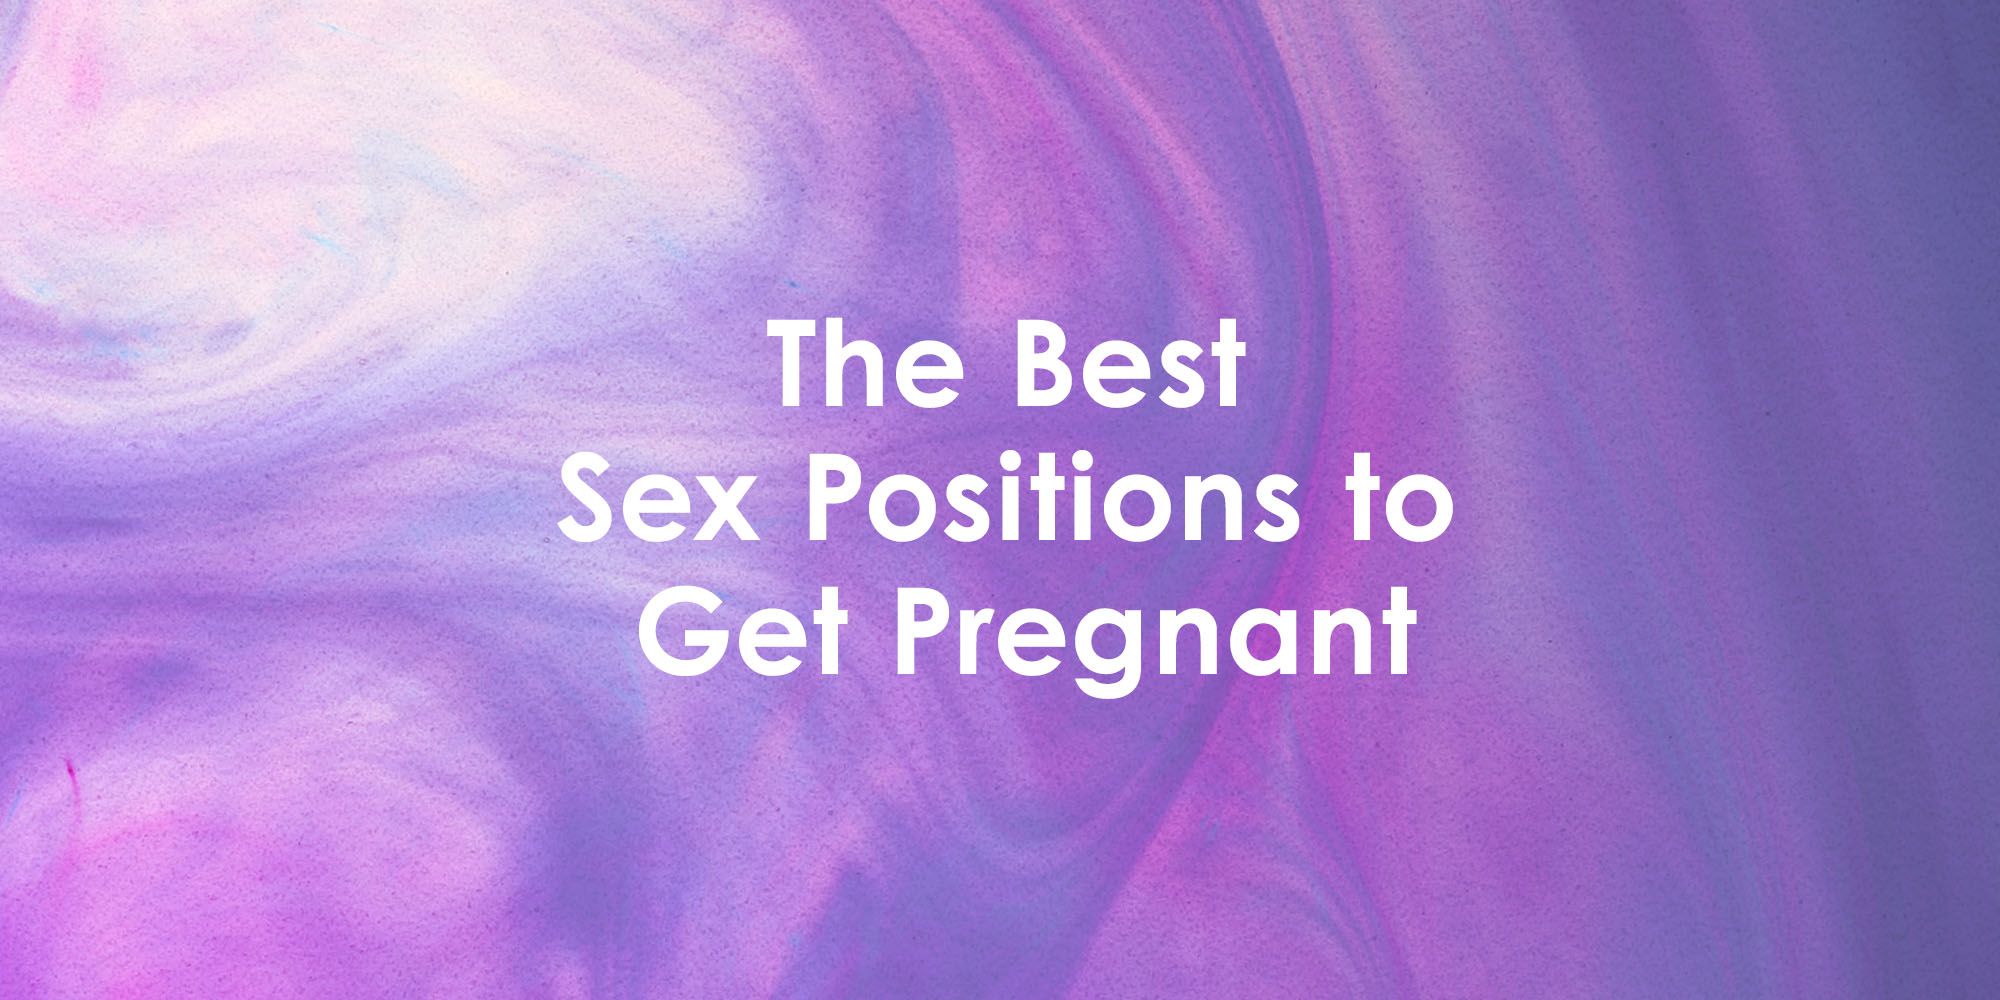 Pregnant Sex Art - Sex Positions Sure to Get You Pregnant - Best Sex Positions to Get Pregnant